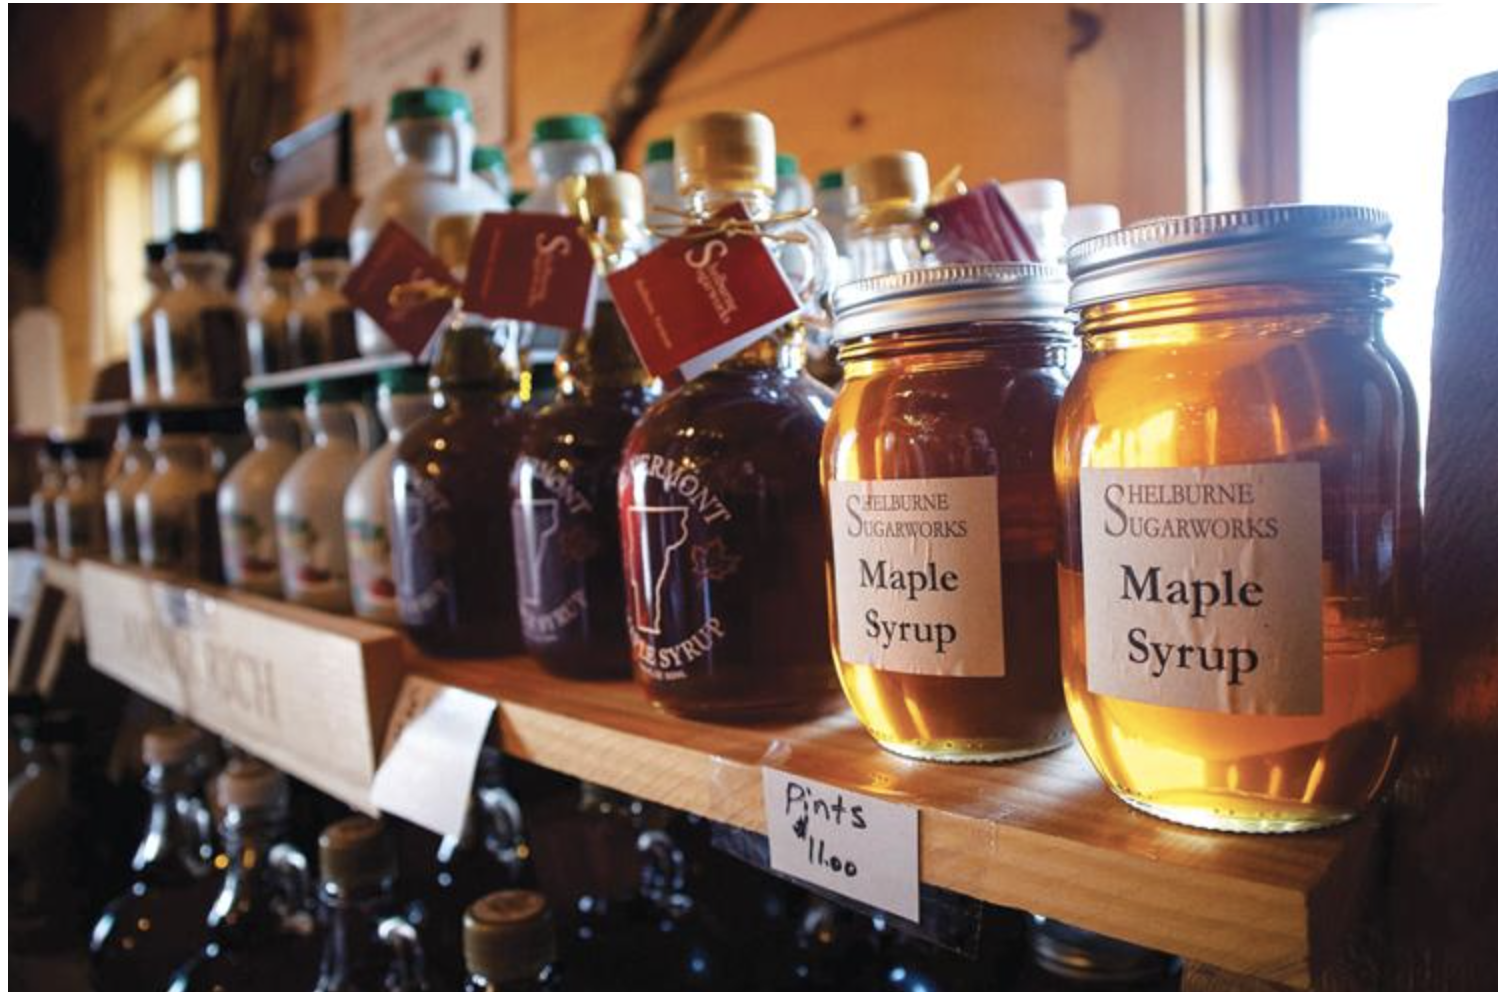  This year’s crop of maple syrup is for sale. Photo by Aylin Arifkhan 